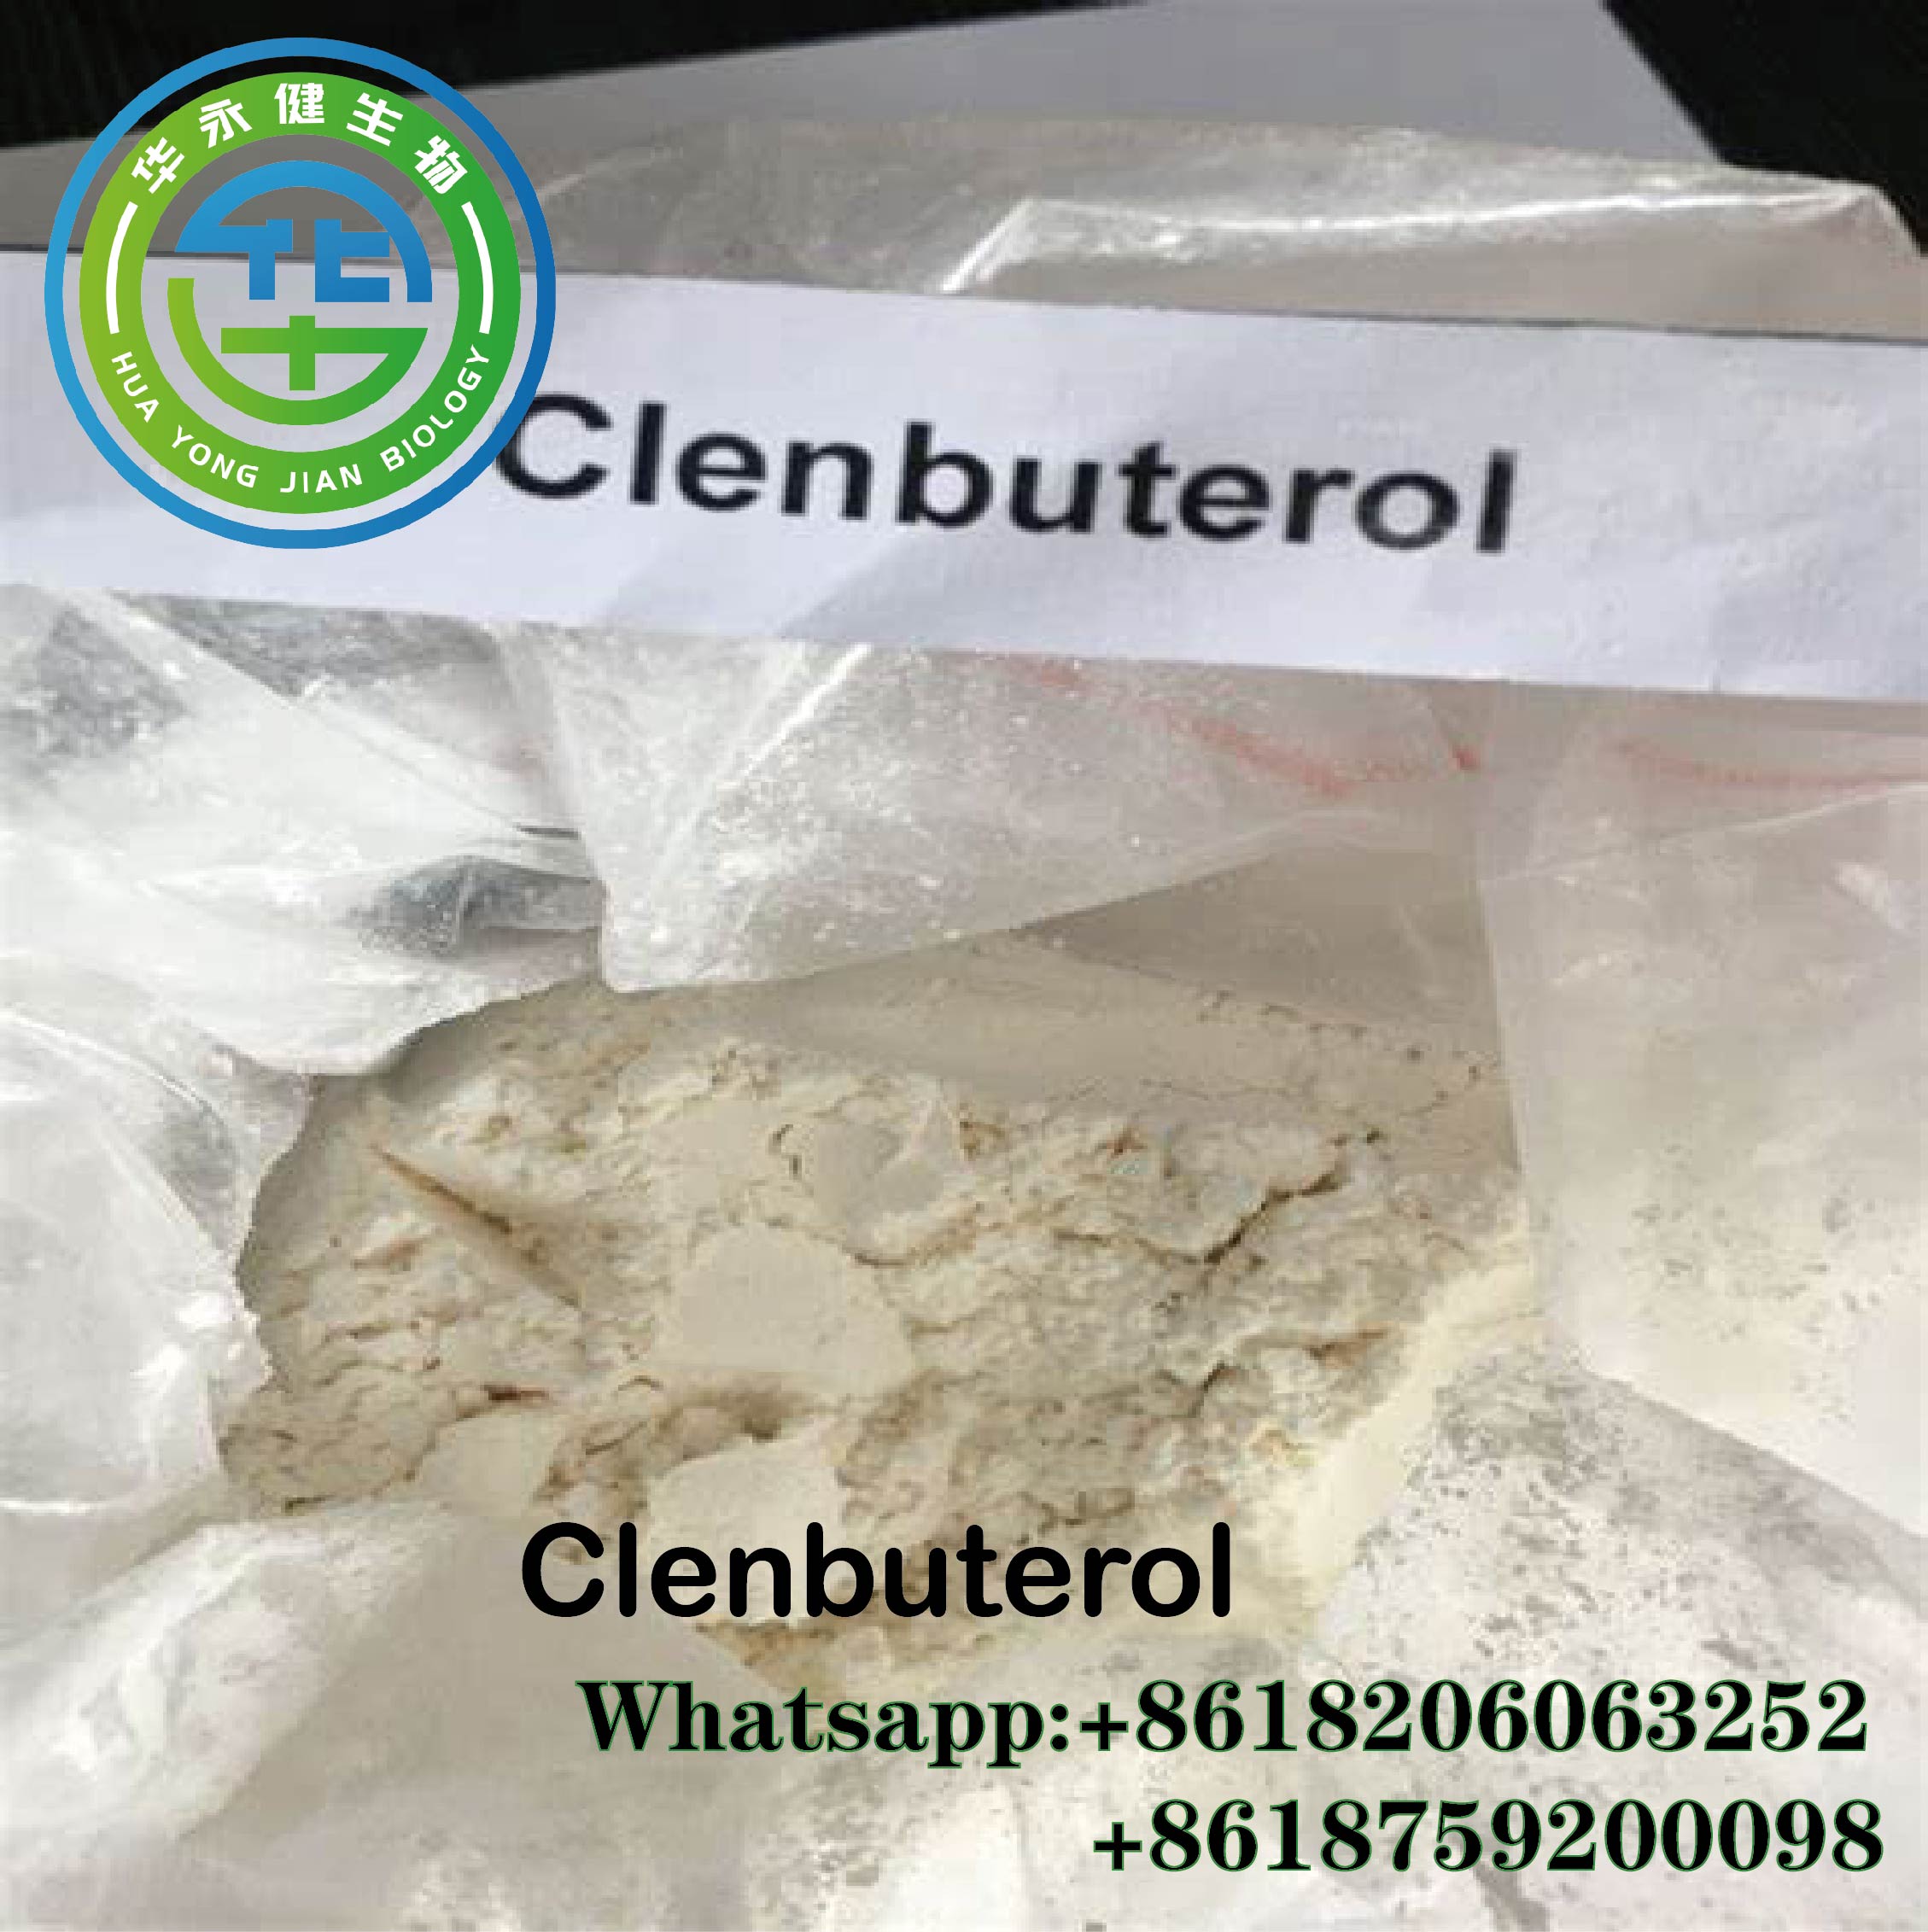 Clenbuterol is a powerful fat loss agent.